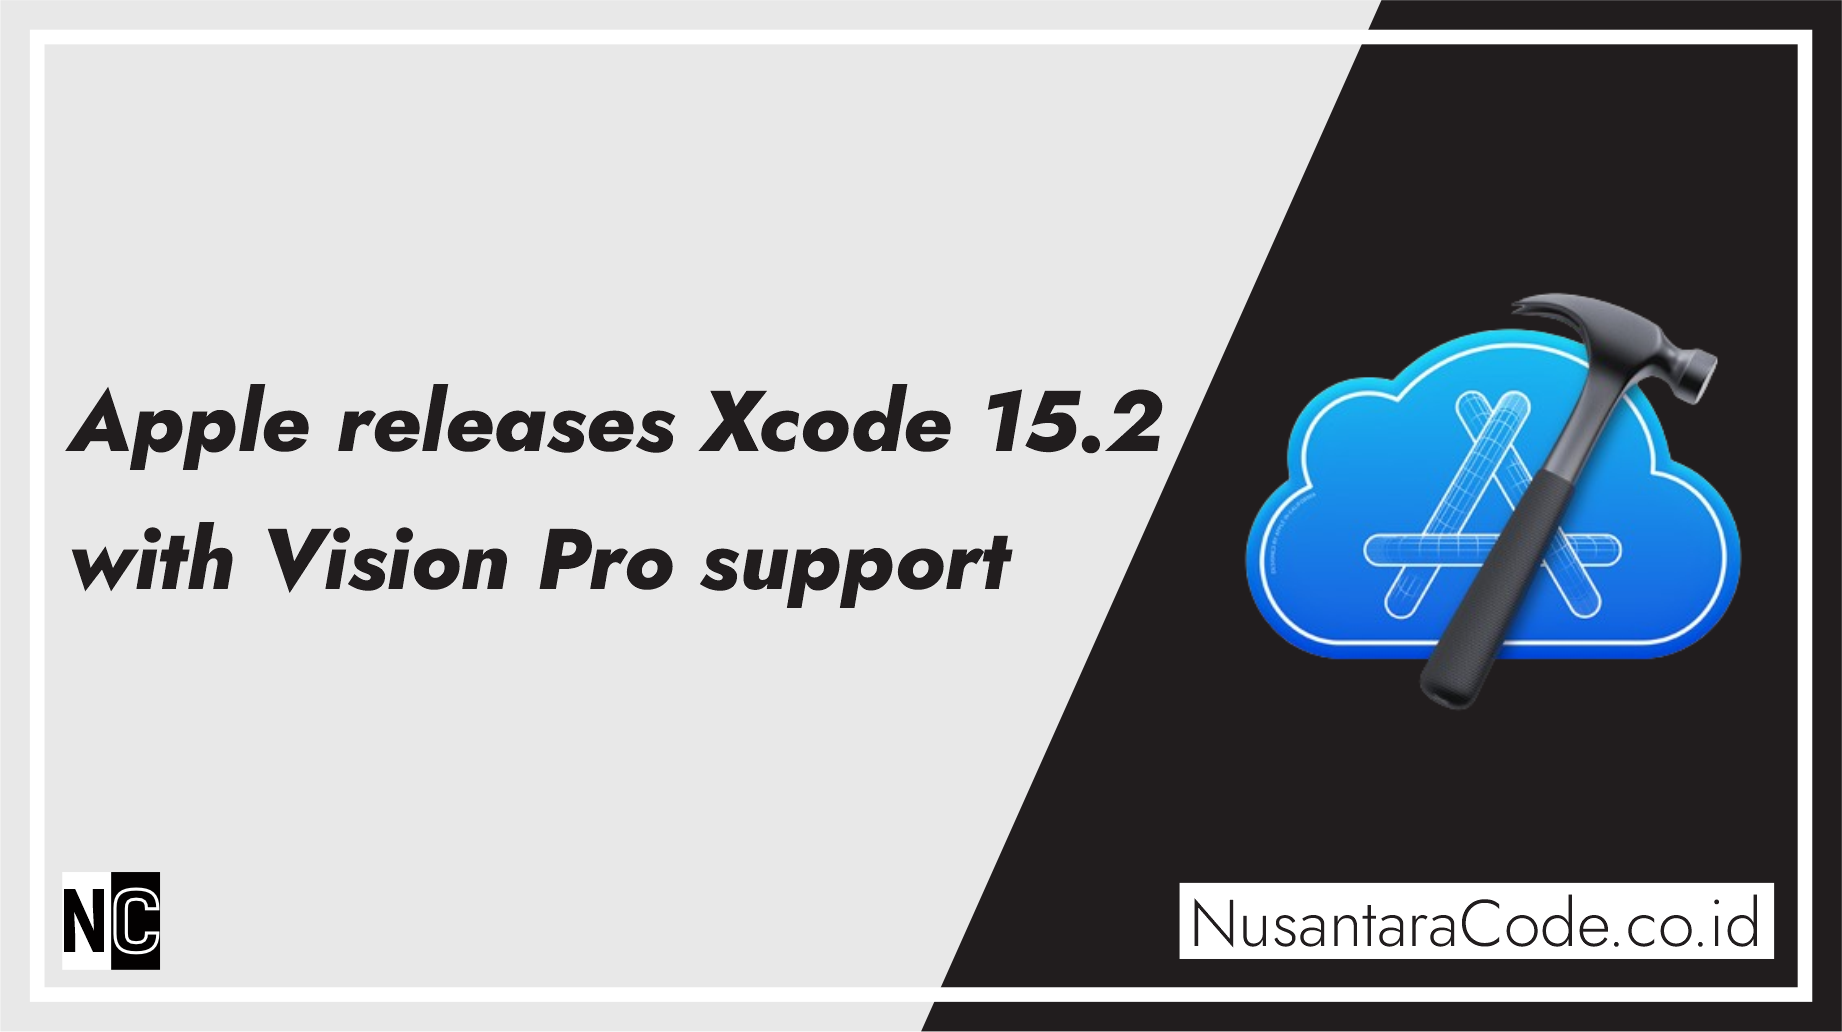 Apple releases Xcode 15.2 with Vision Pro support